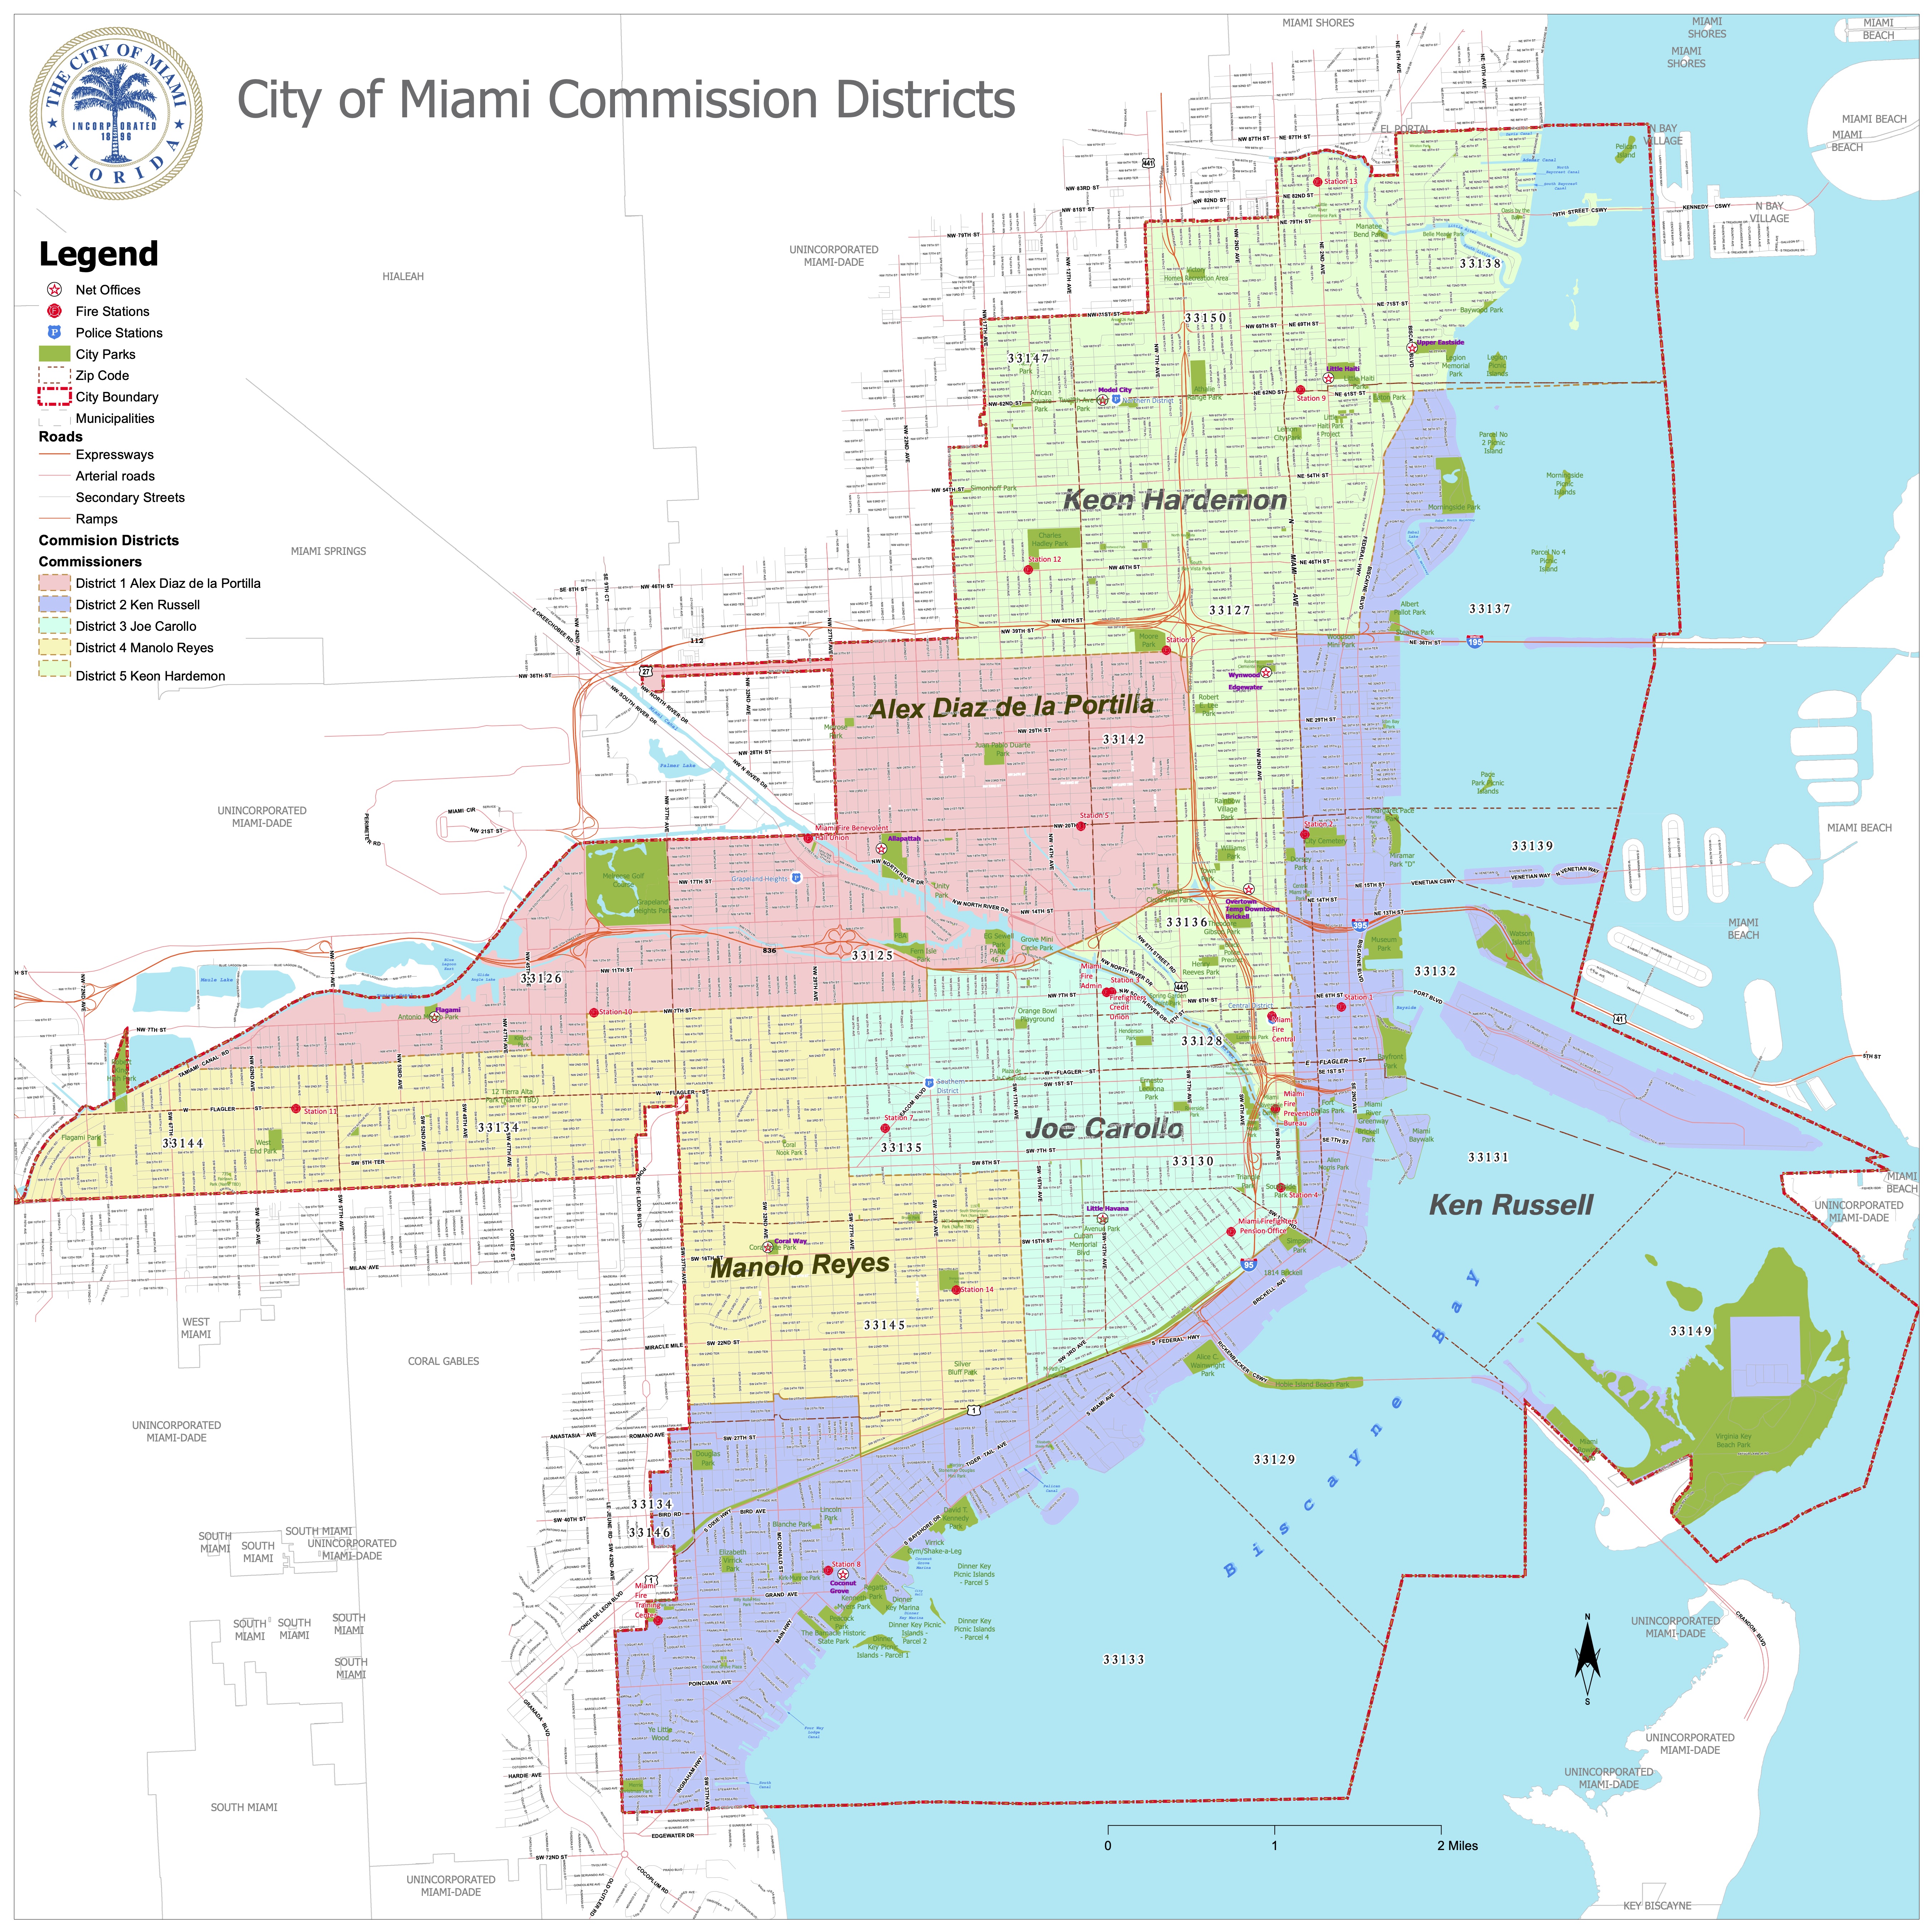 city of miami map File City Of Miami Commission Districts Map 2019 Jpg Wikimedia city of miami map